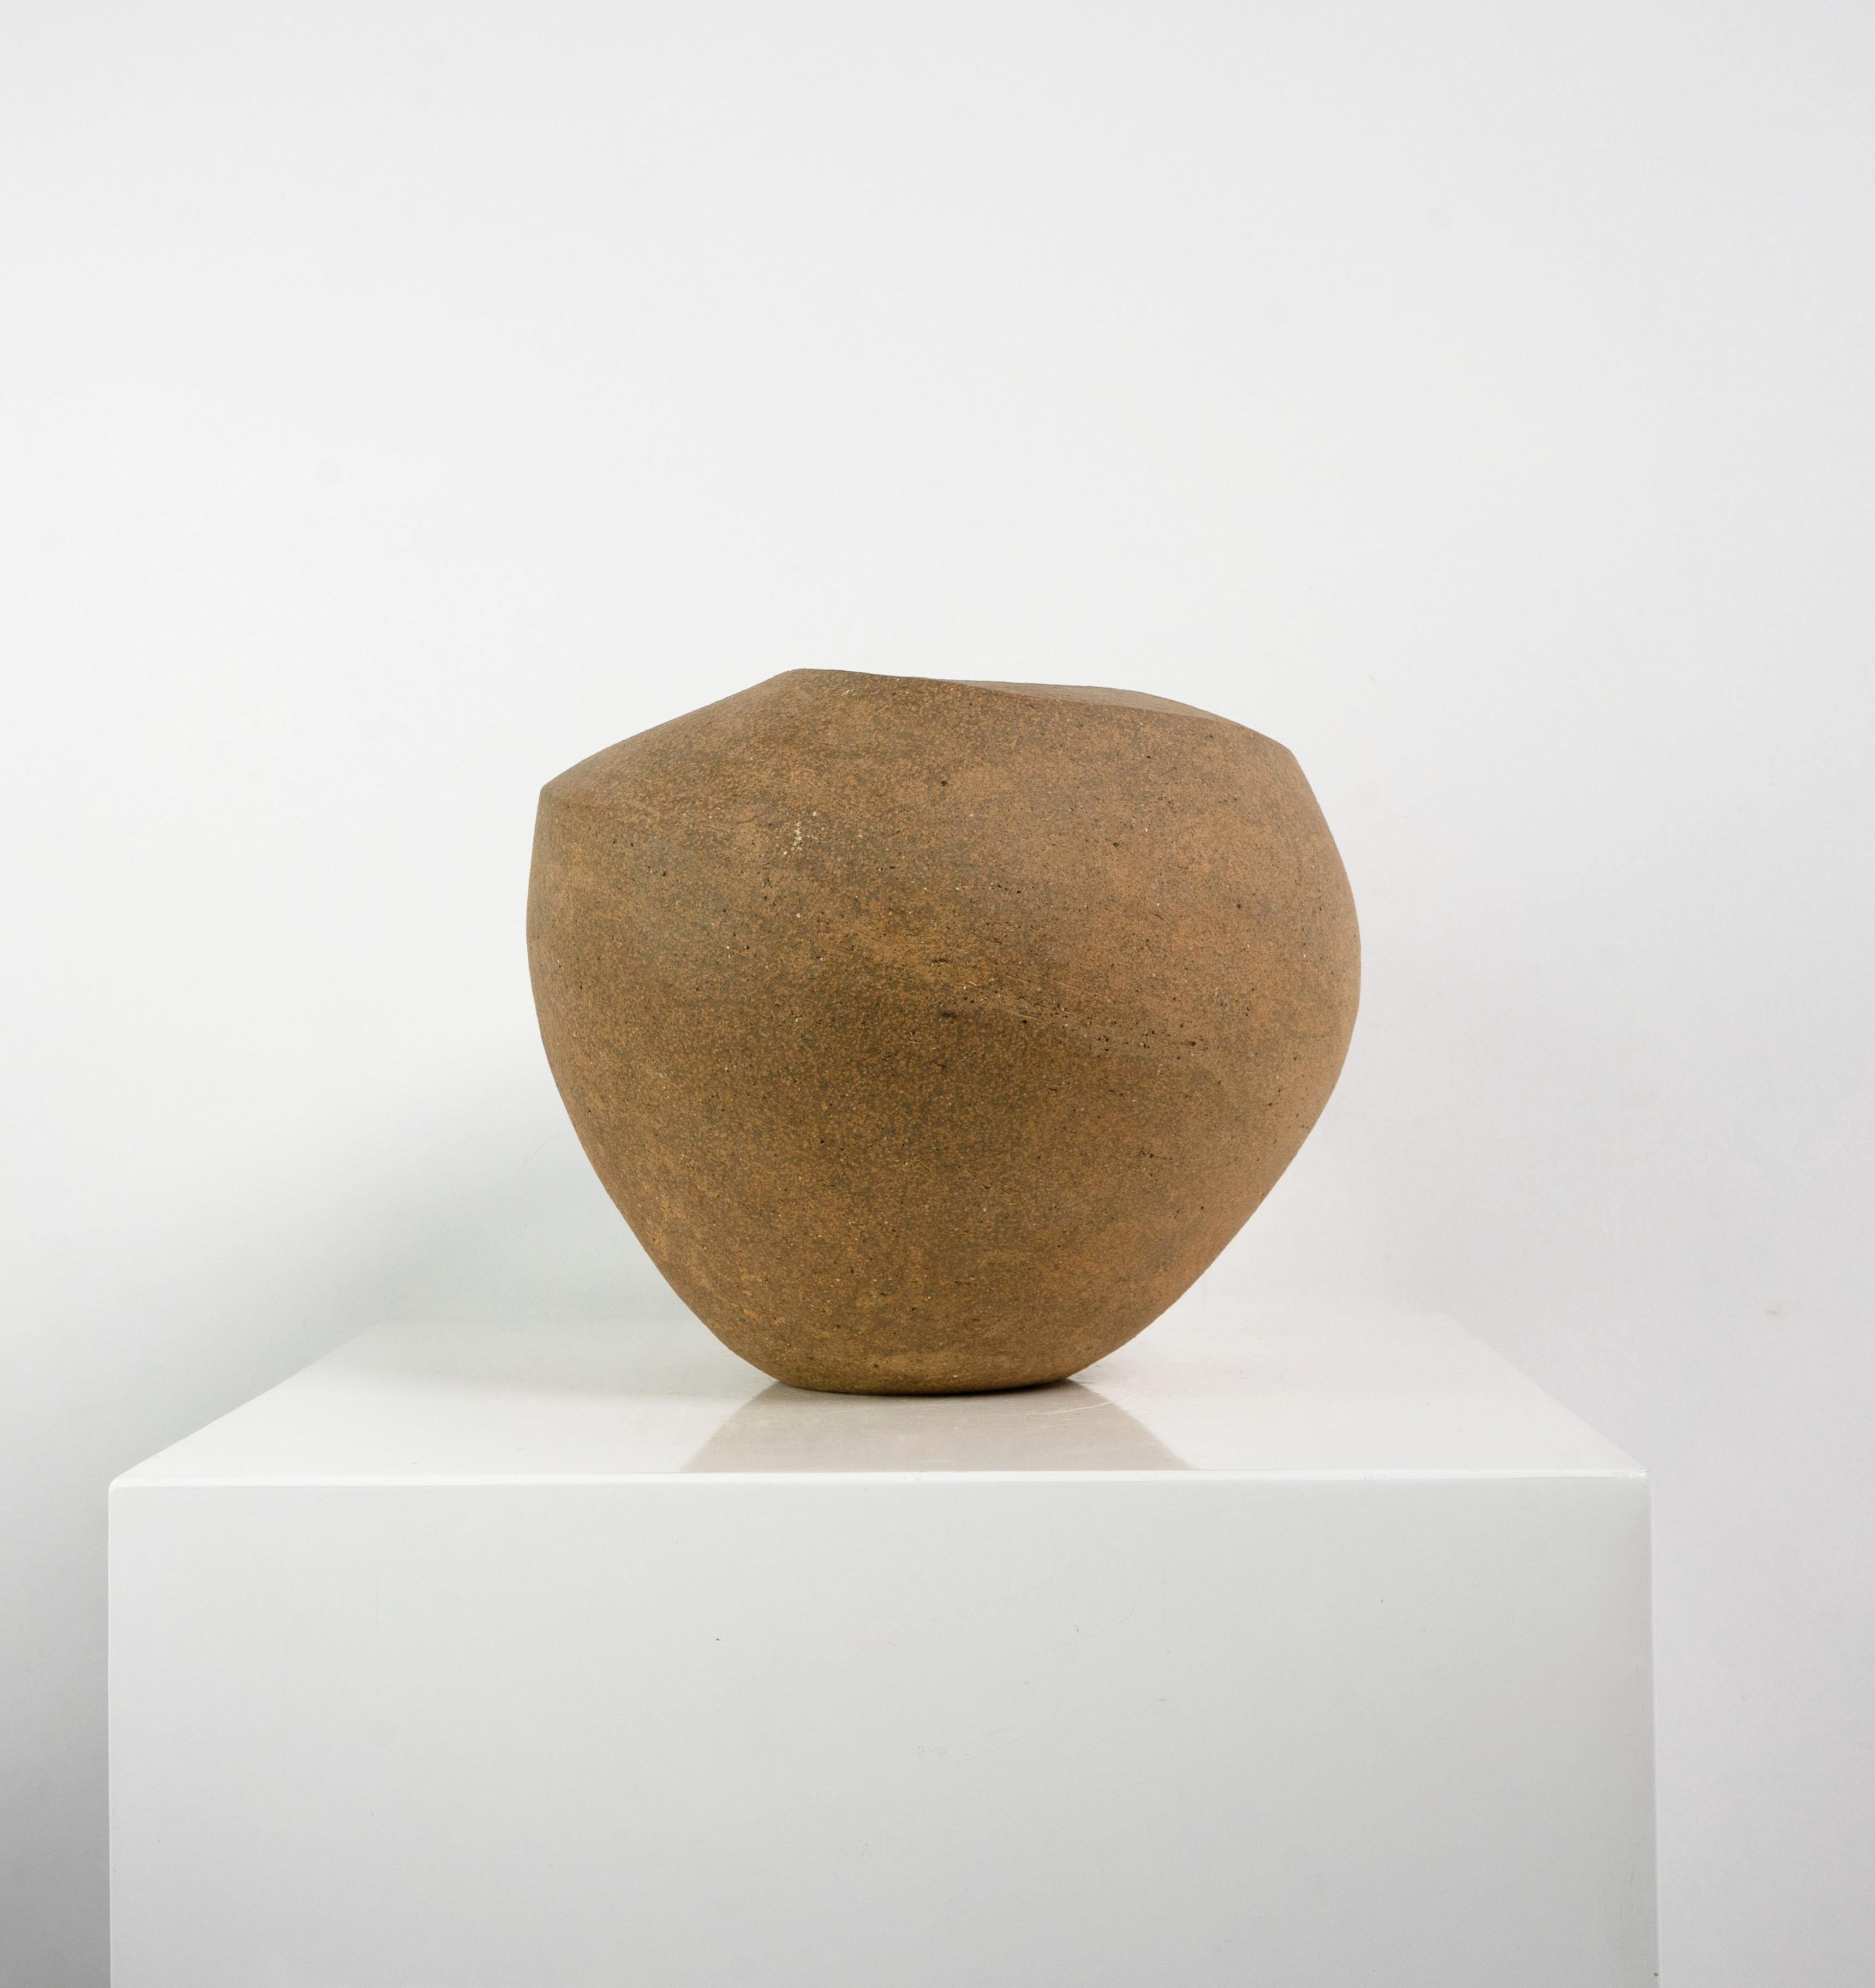 A late 20th Century, asymmetrical ovoid stoneware vessel. 

Dimensions (cm, approx):
Height: 23
Width: 27
Depth: 26.